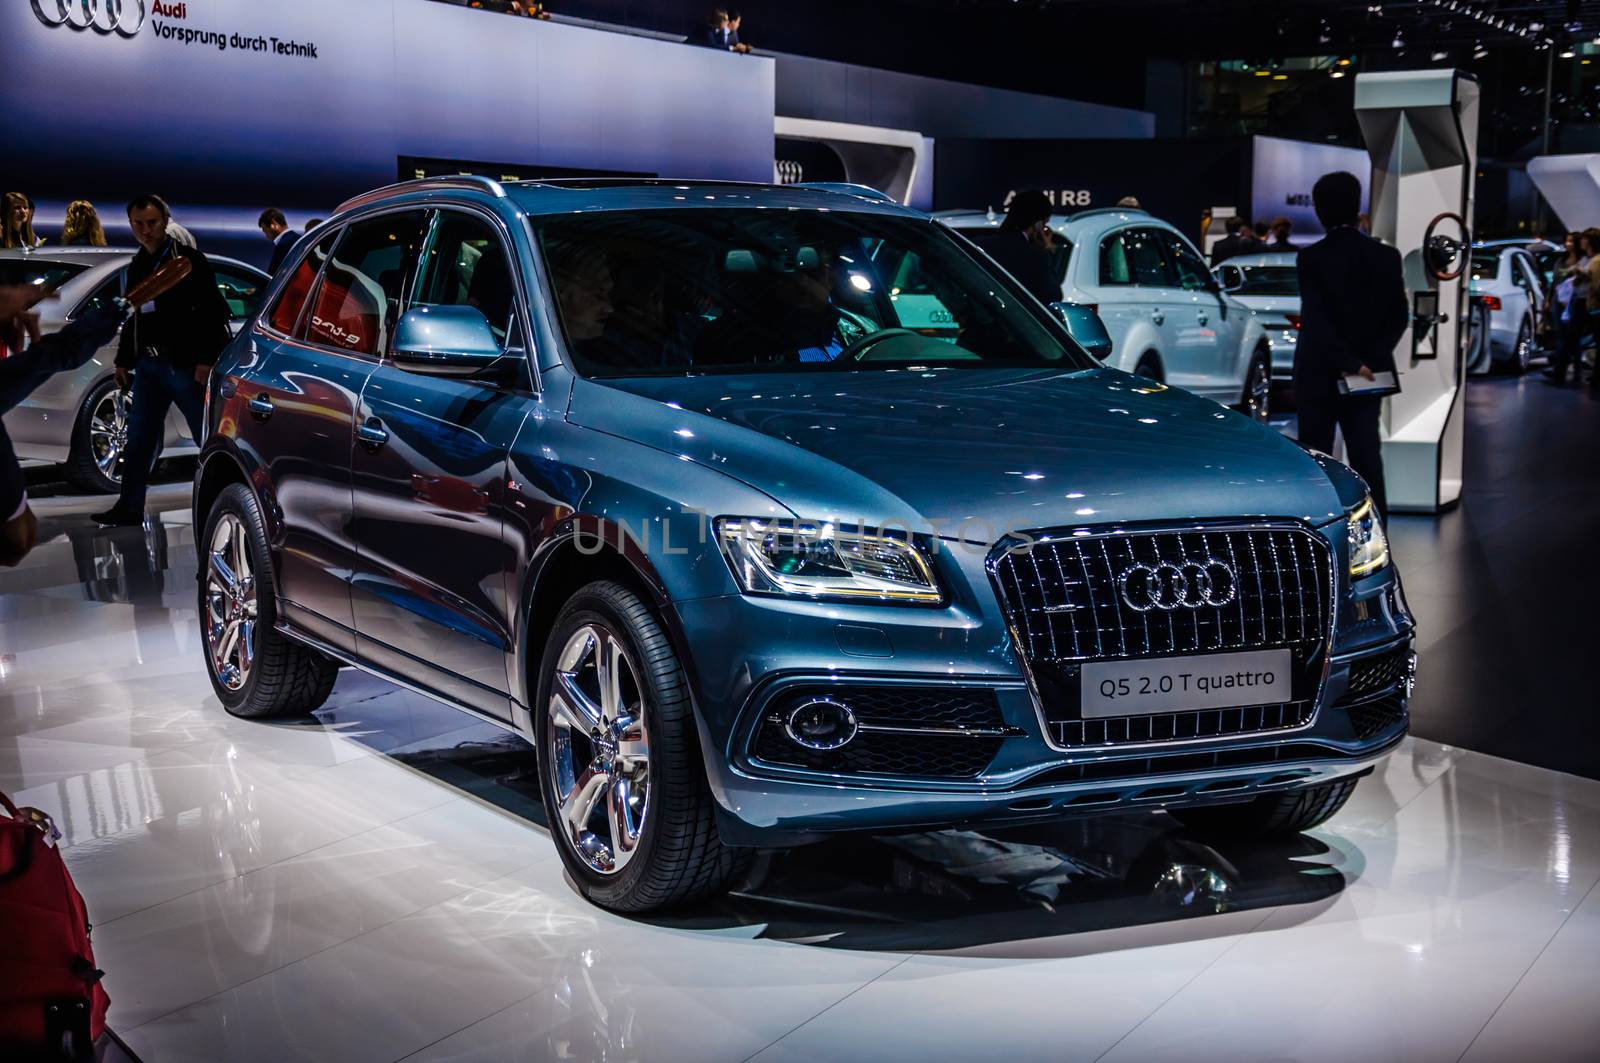 MOSCOW, RUSSIA - AUG 2012: AUDI Q5 2.0 T QUATTRO presented as world premiere at the 16th MIAS (Moscow International Automobile Salon) on August 30, 2012 in Moscow, Russia